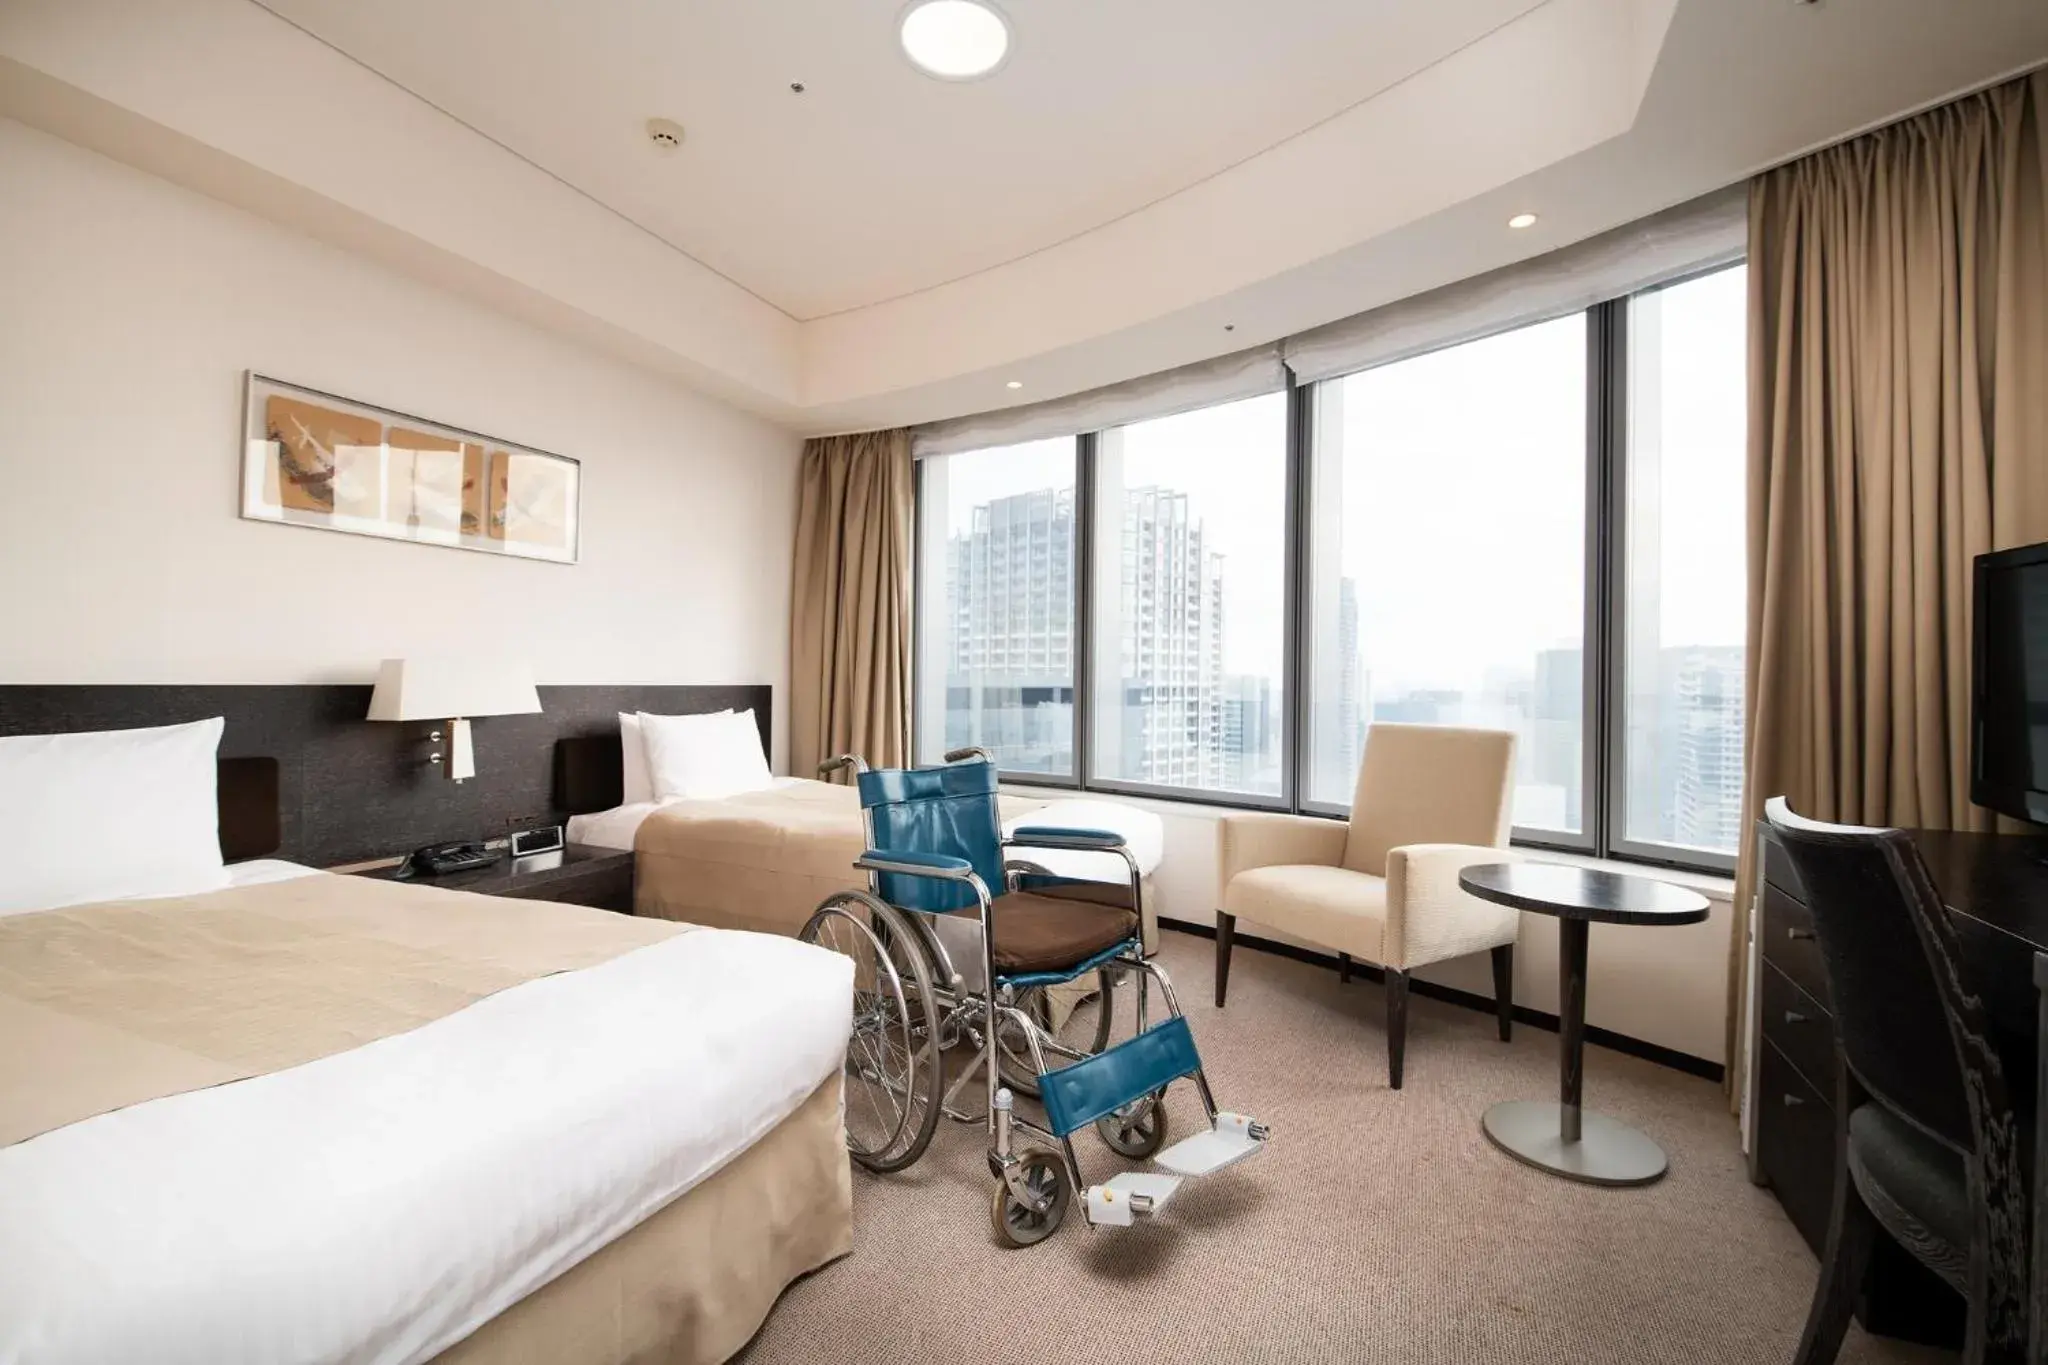 Facility for disabled guests in Park Hotel Tokyo